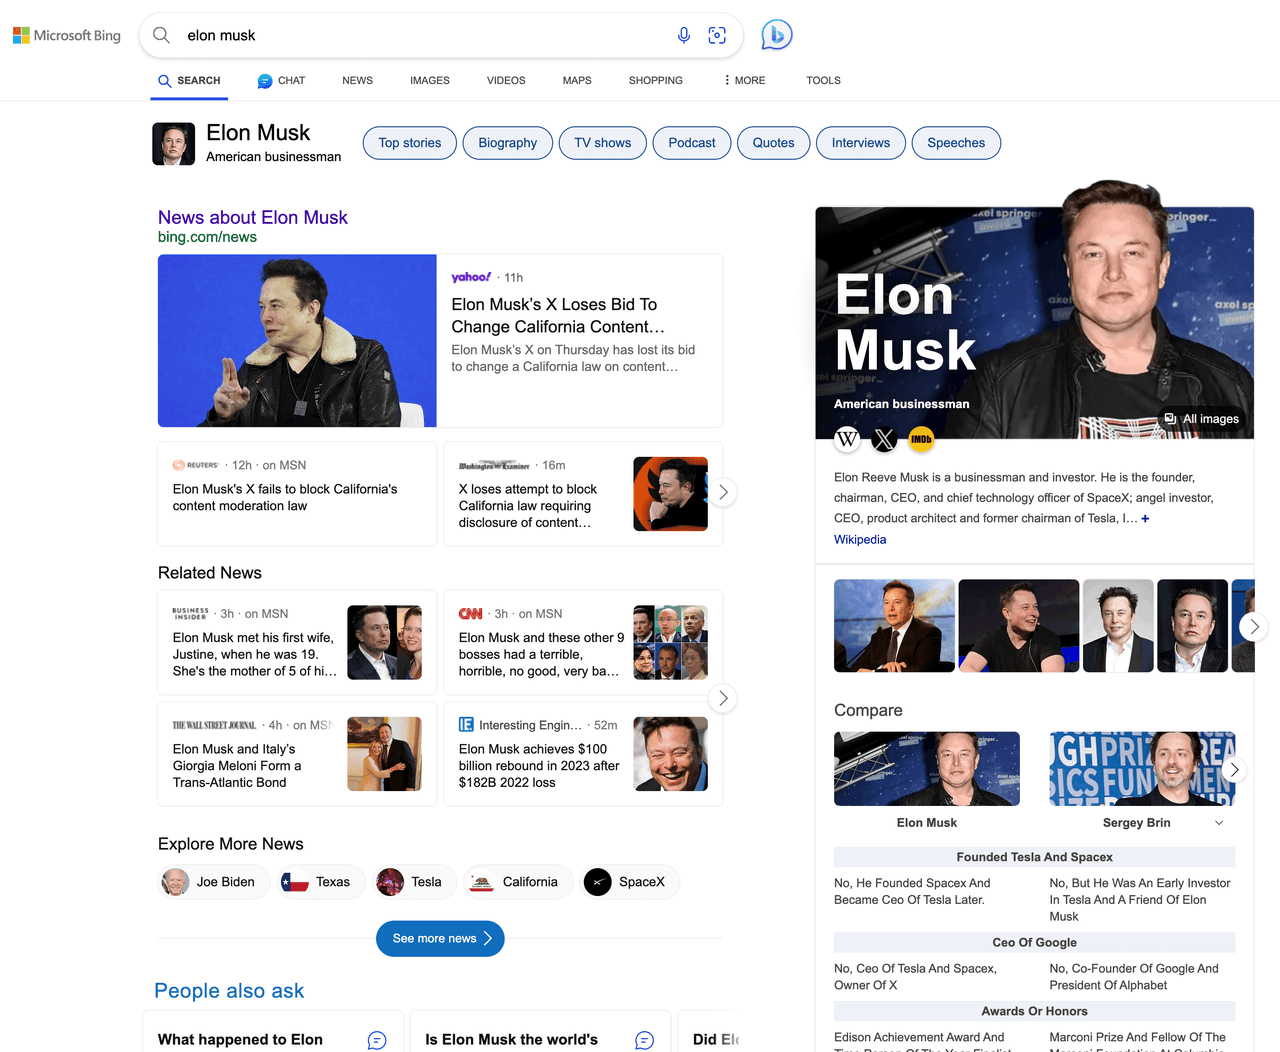 news-about-elom-musk